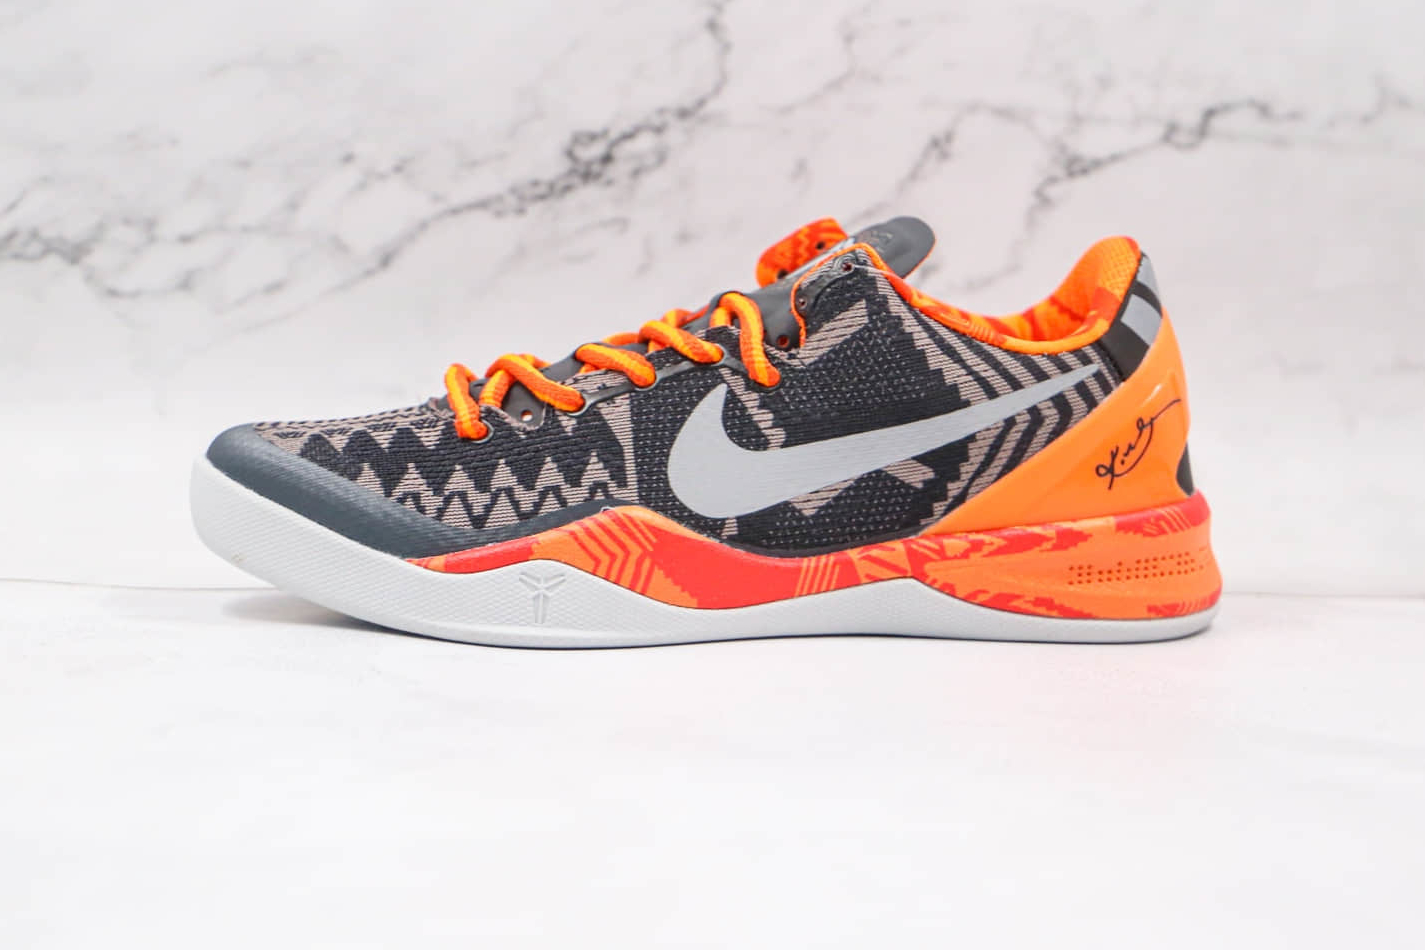 Nike Kobe 8 System 'Black History Month' 583112-001 - Limited Edition Sneakers